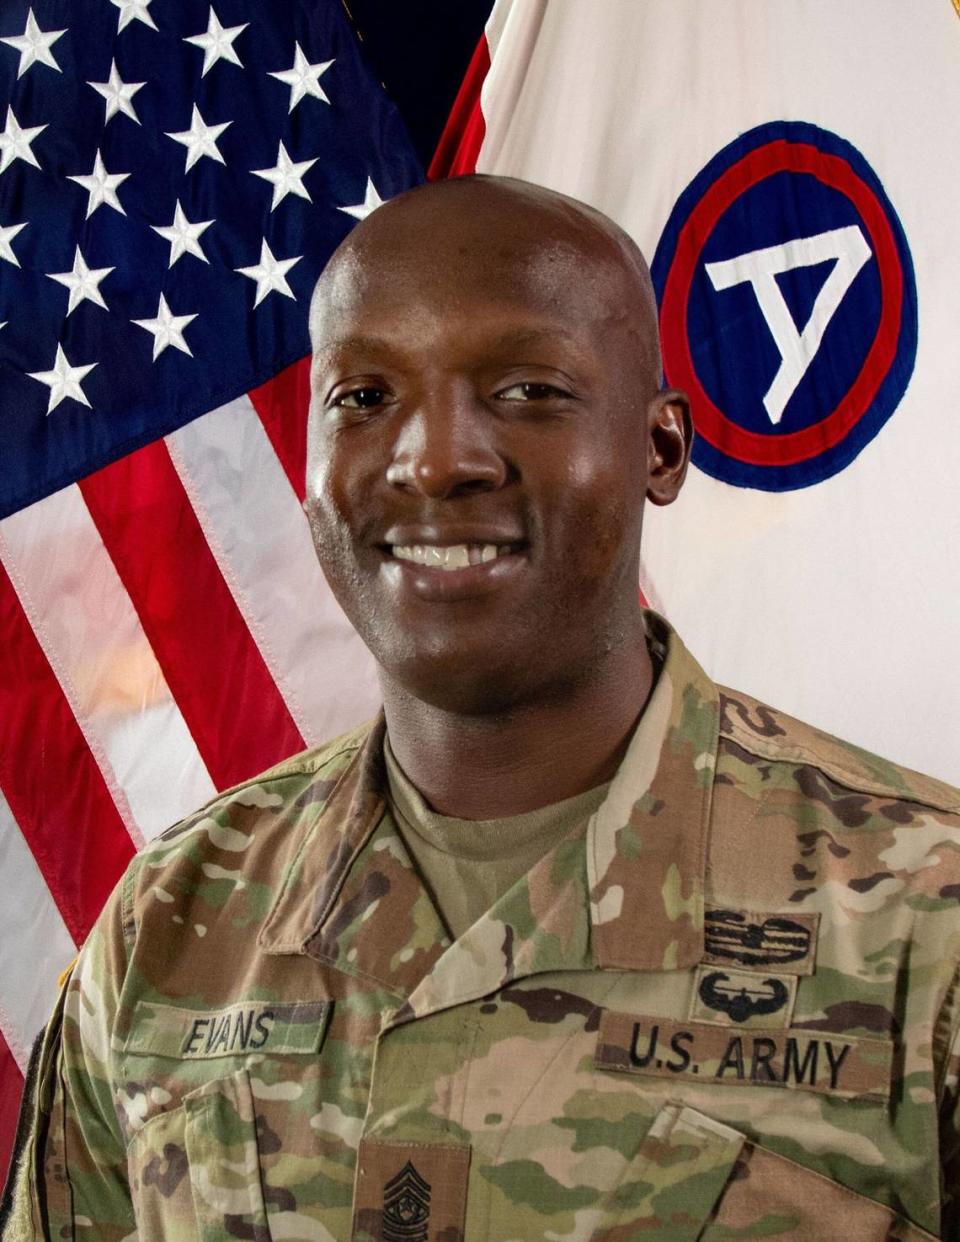 Command Sgt. Maj. Carlos Evans, 38, was killed in a shooting where three children also died.